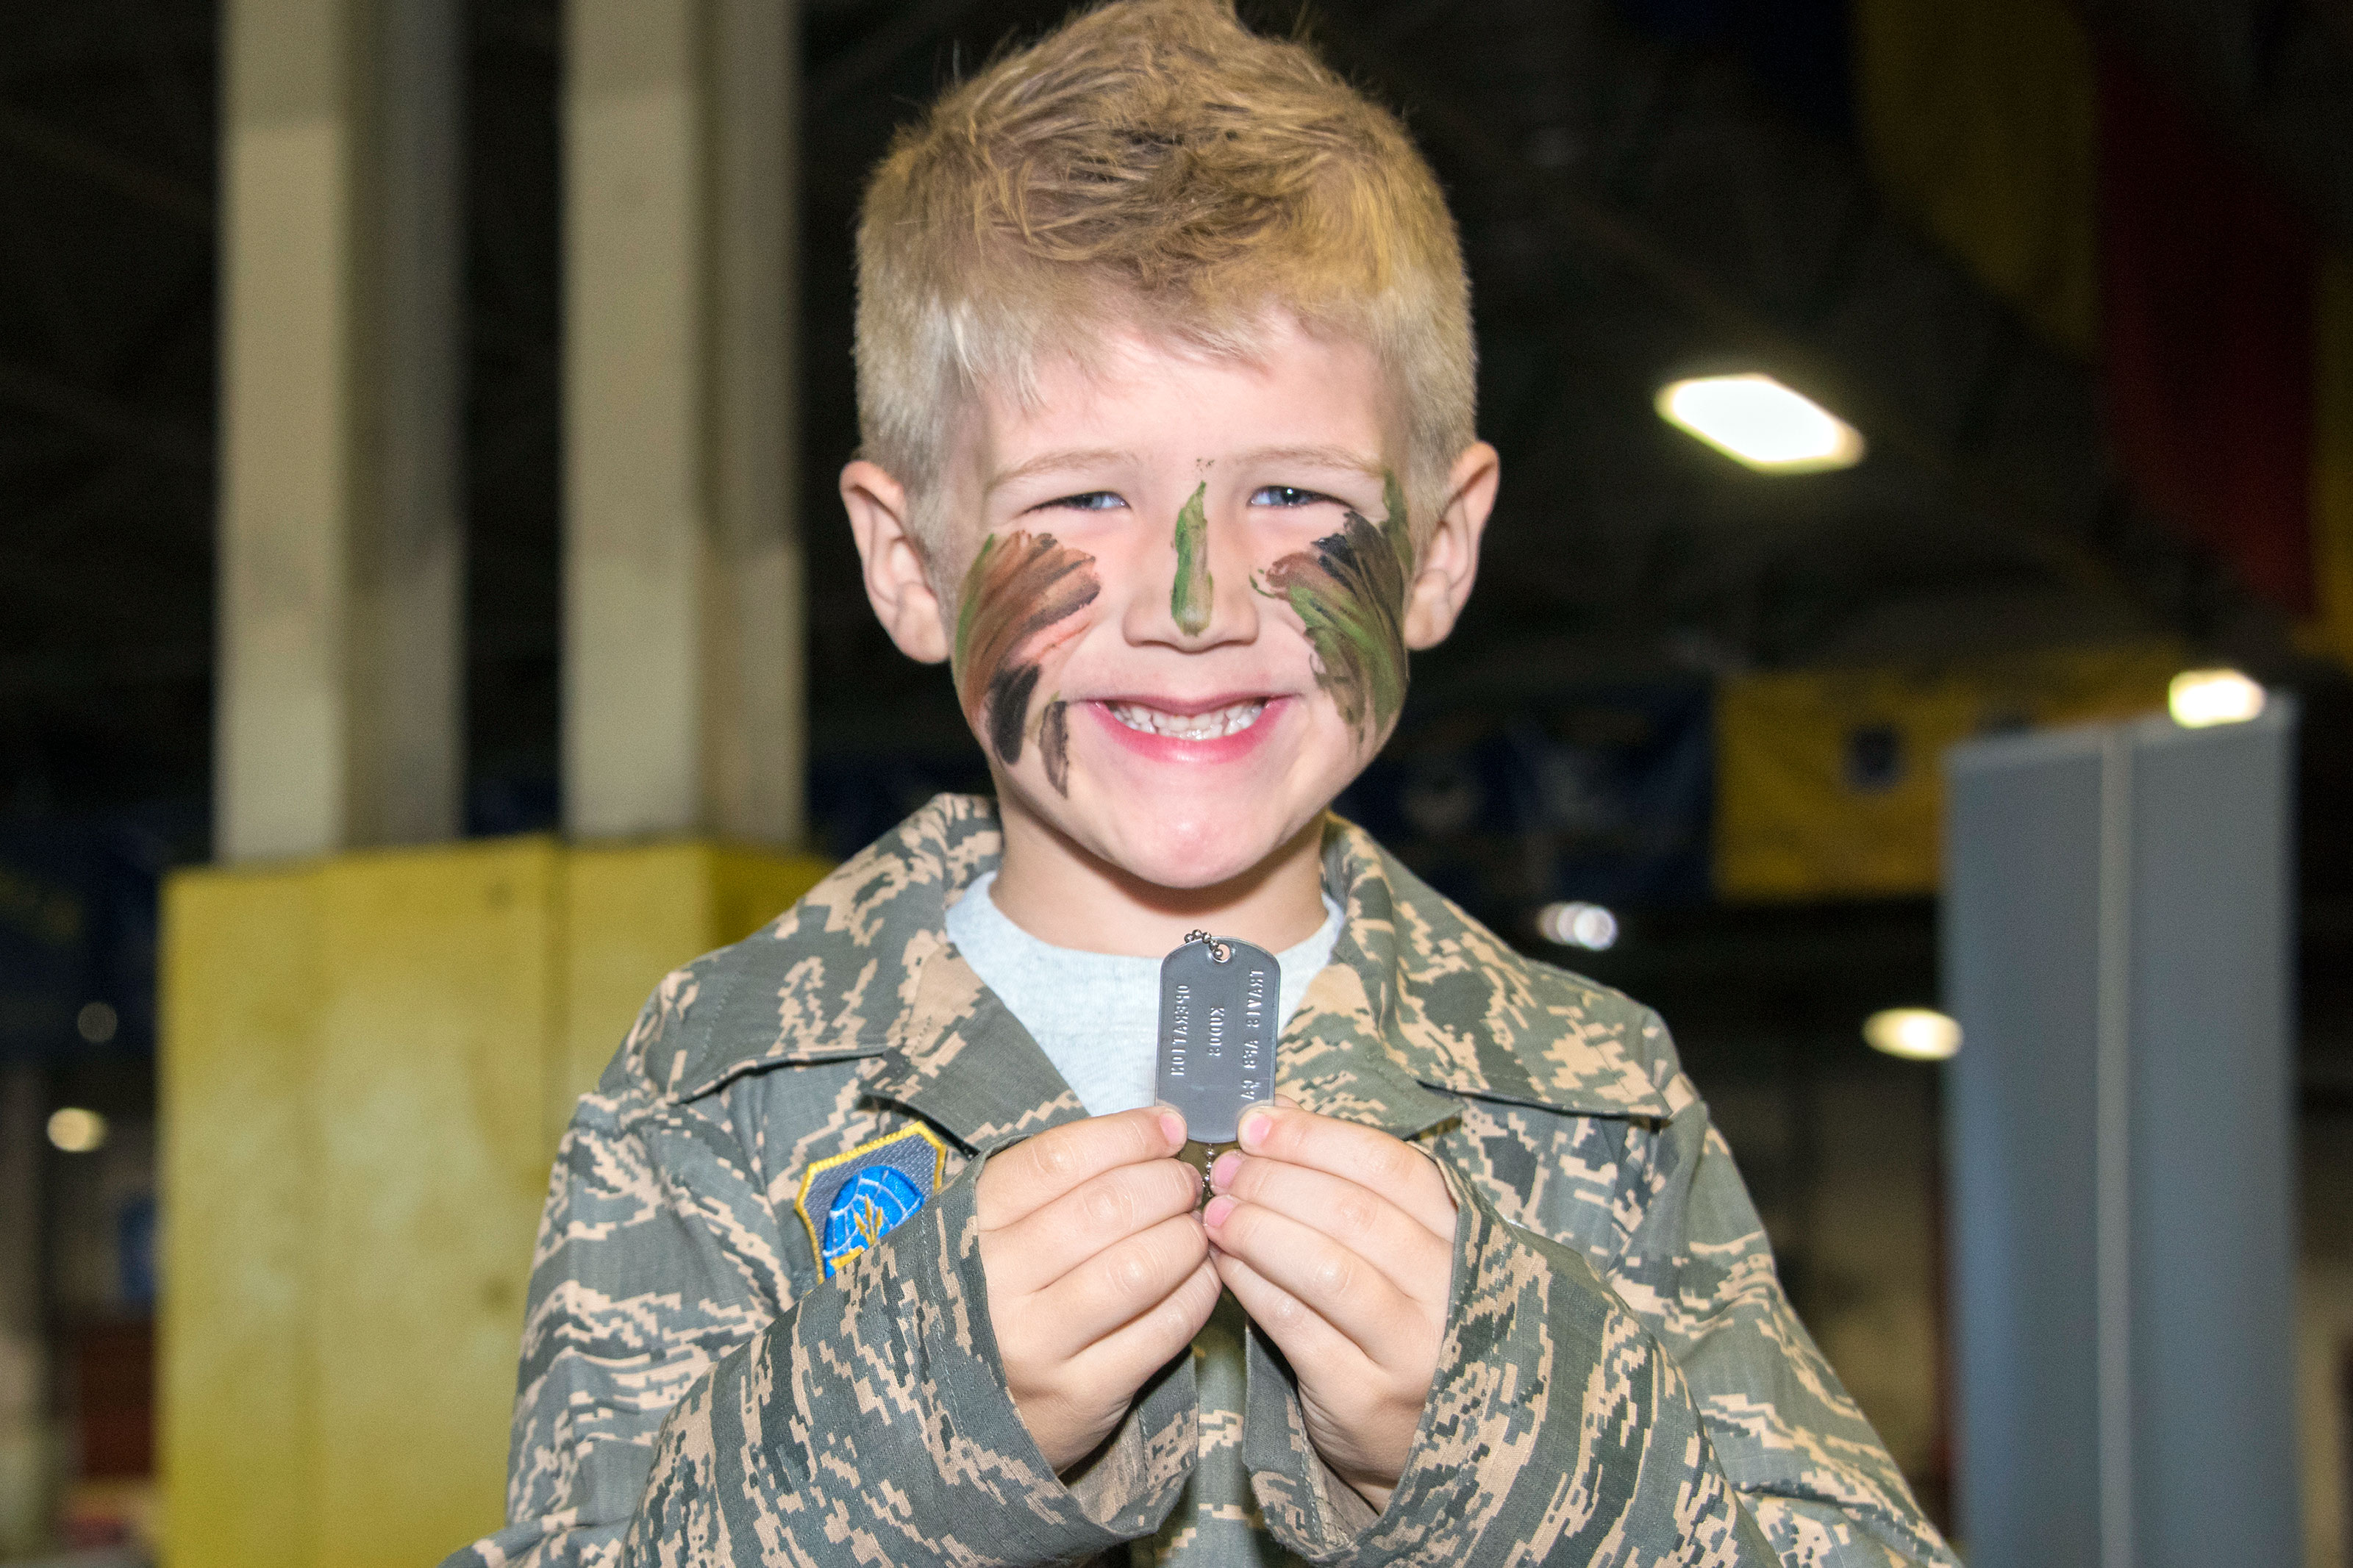 A child displays the dog tags he received as part the out-processing line at the 60th Aerial Port Squadron cargo warehouse, set up to host U. S. Air Force families for Kids Understanding Deployment Operations day, Oct. 21, 2017, Travis Air Force Base Calif. (U.S. Air Force/Heide Couch)